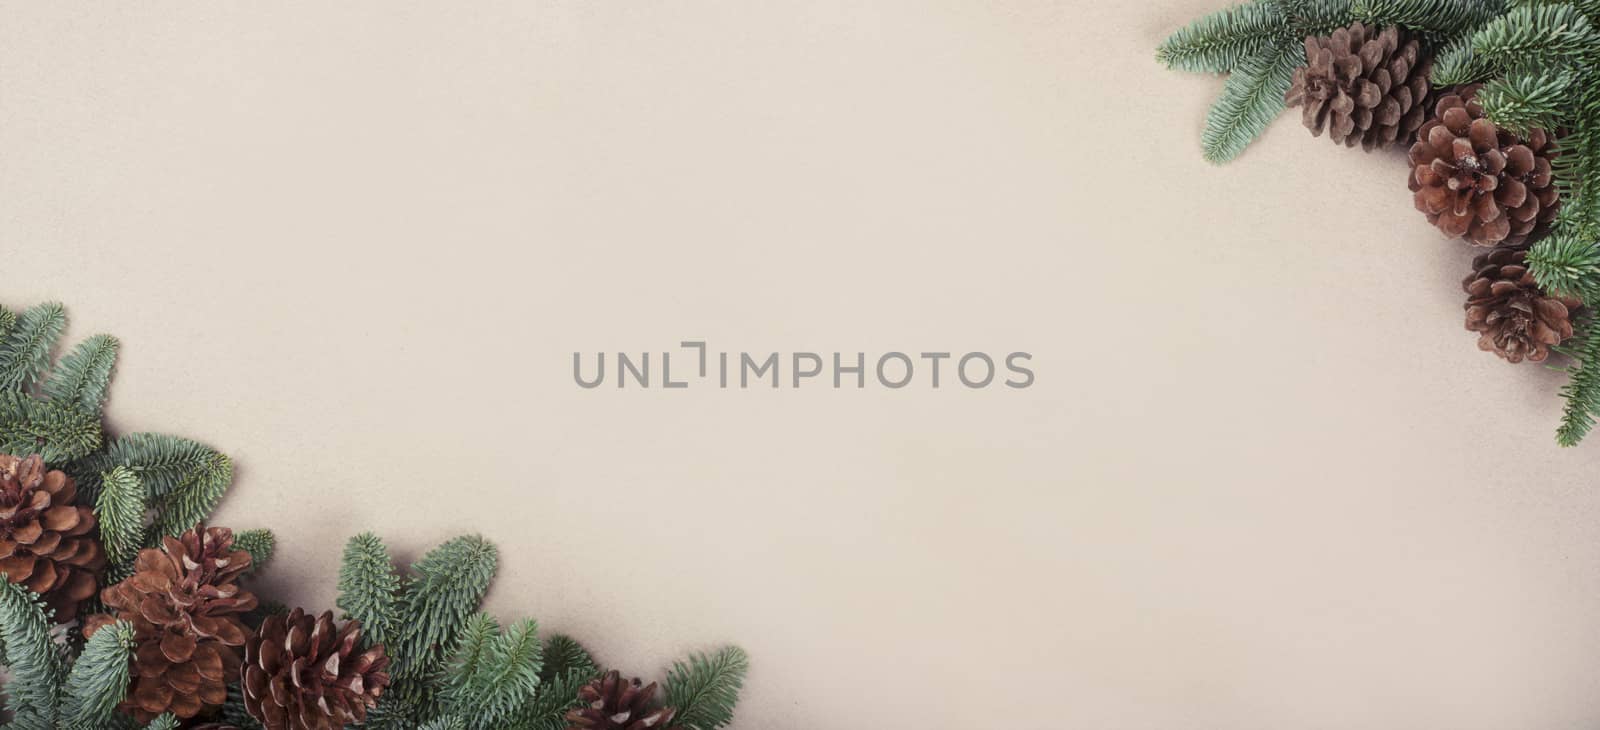 Christmas card banner light background with noble fir tree branches and pine cones border frame with copy space for text